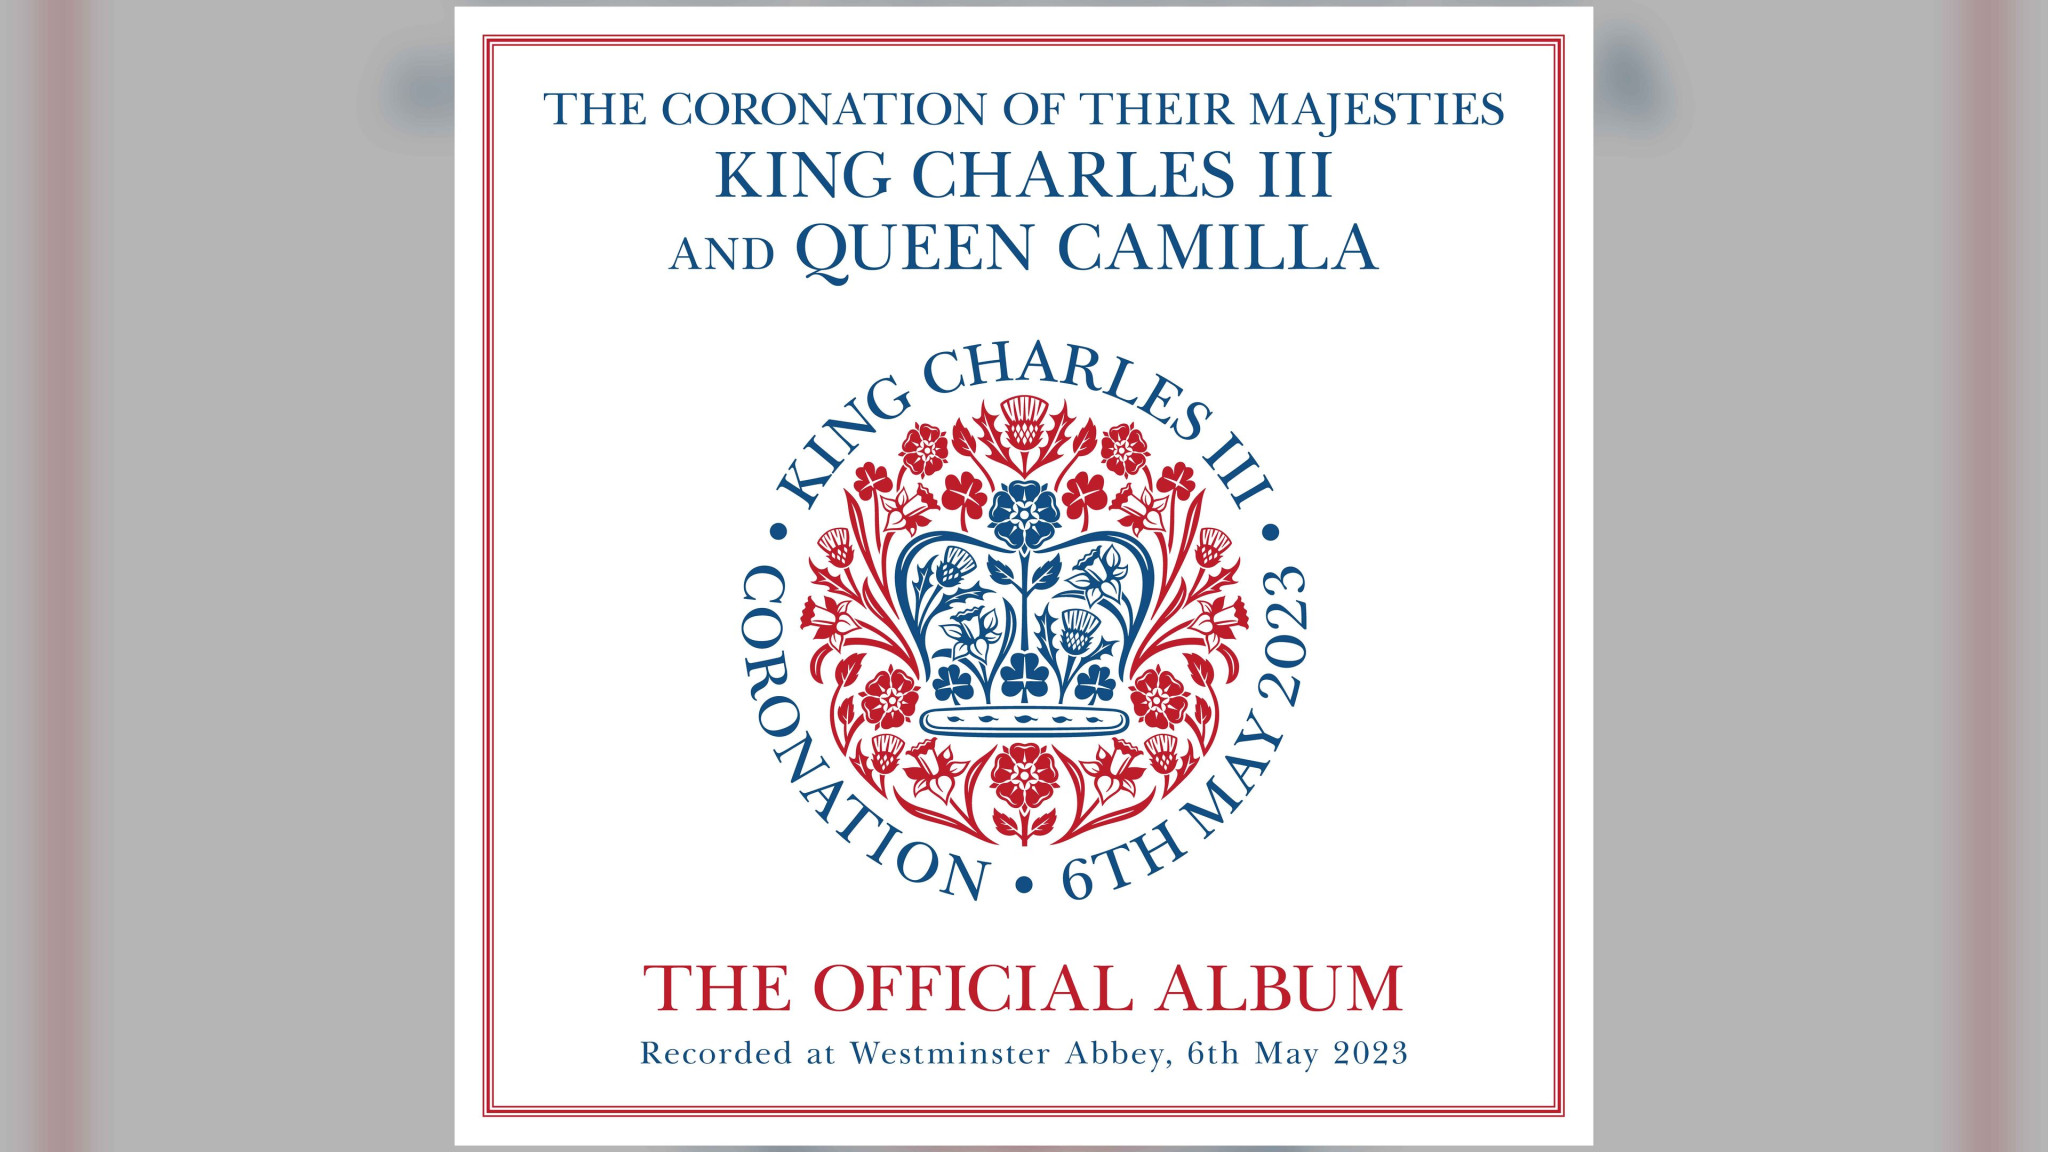 The Official Recording of the Coronation of Their Majesties King Charles III & Queen Camilla